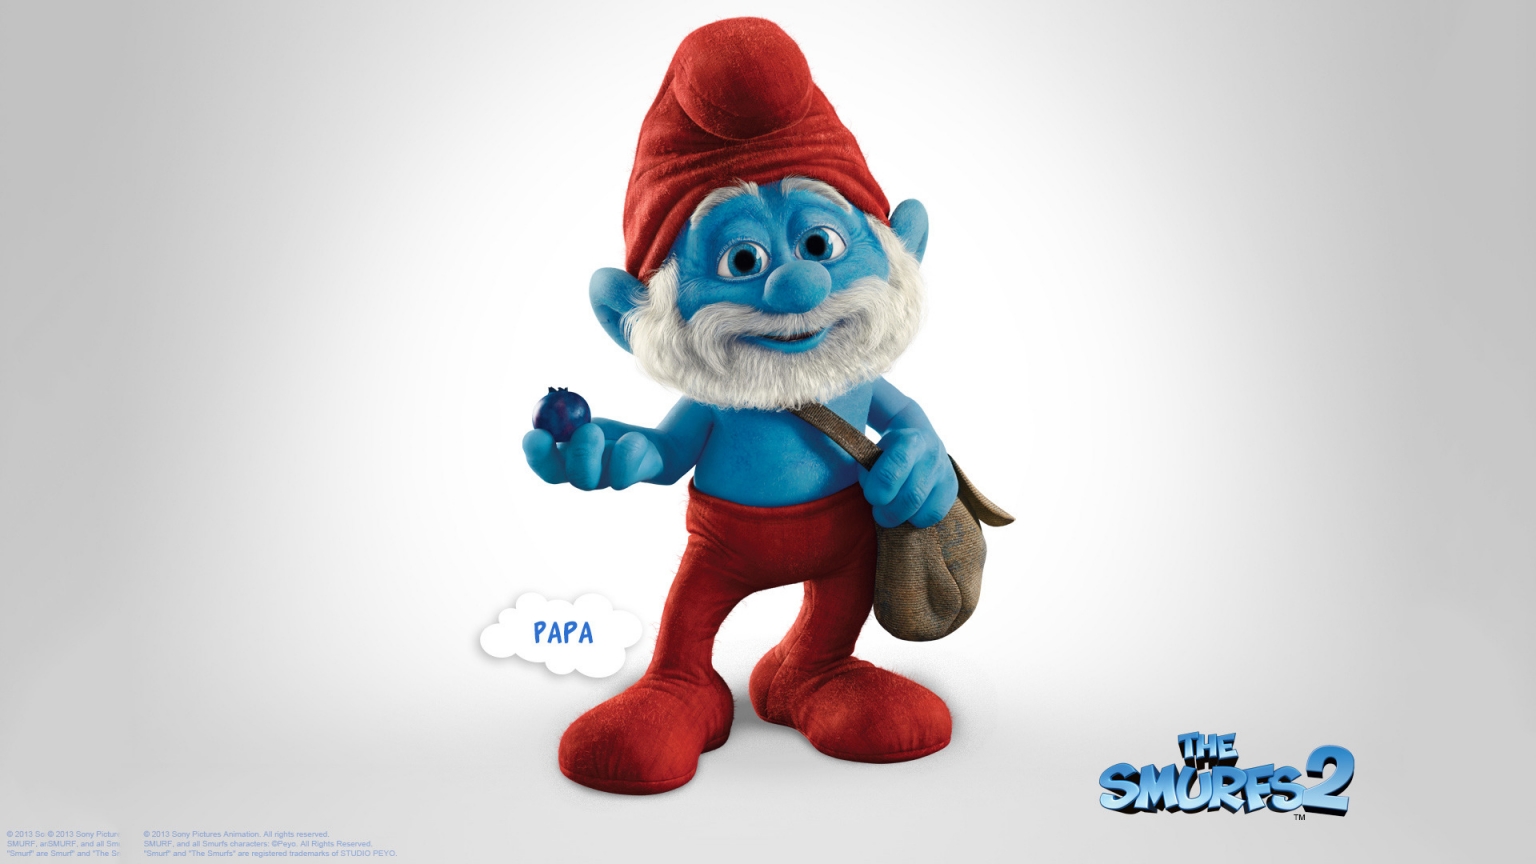 Papa The Smurfs 2 for 1536 x 864 HDTV resolution